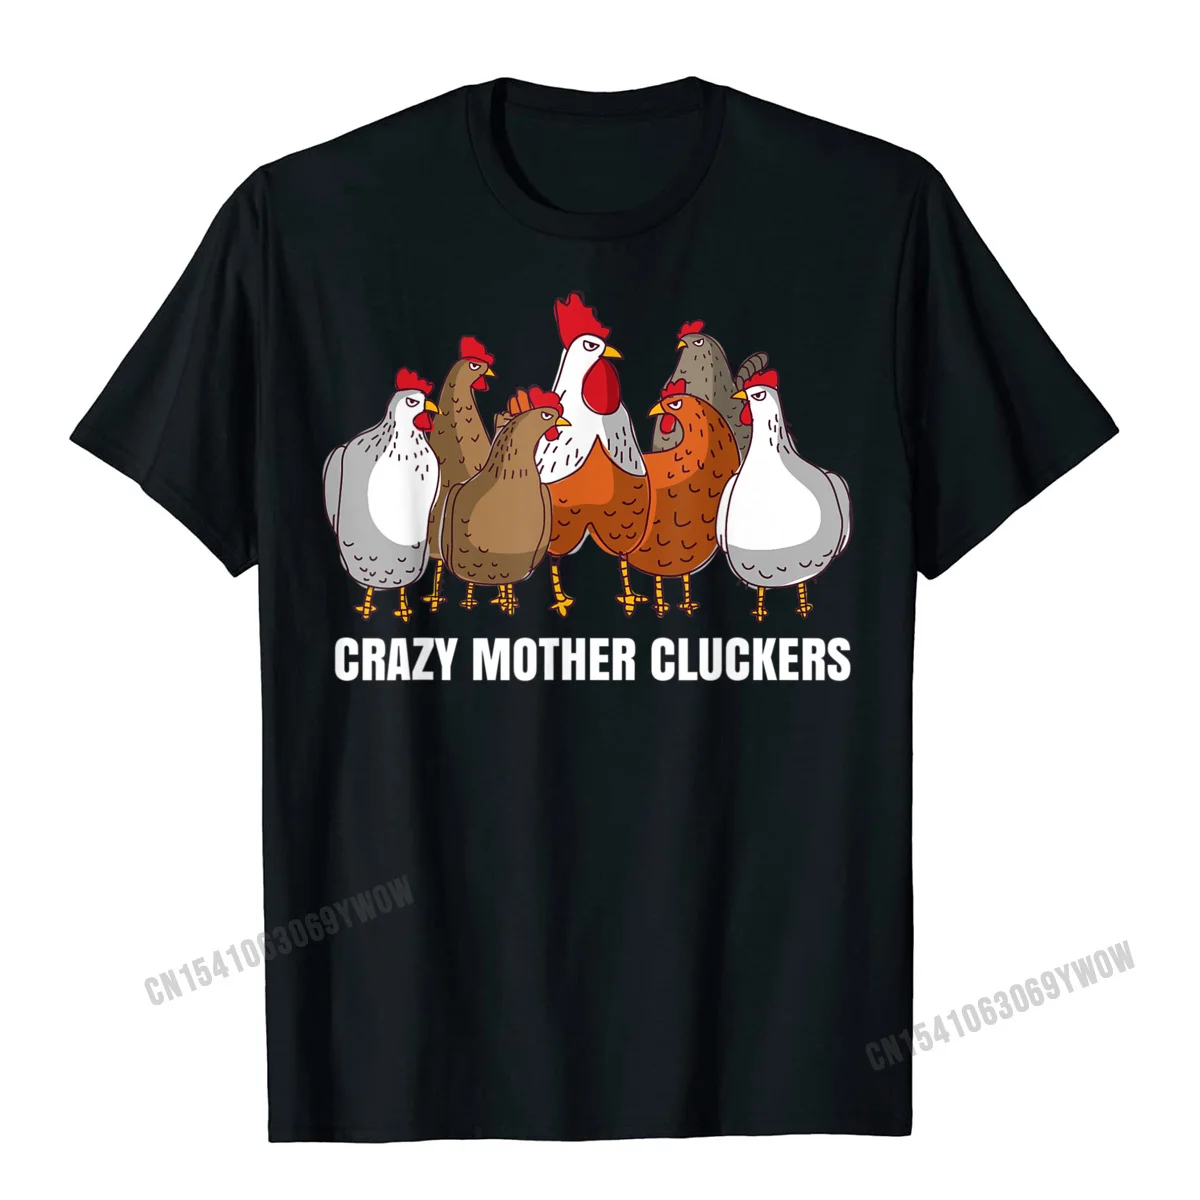 Europe Coupons Short Sleeve Normal T Shirts All Cotton O Neck Men Tops T Shirt Geek Tops & Tees Summer Fall Free Shipping Crazy Mother Cluckers Gift Chicken Shirts for Chicken Lovers T-Shirt__1222 black